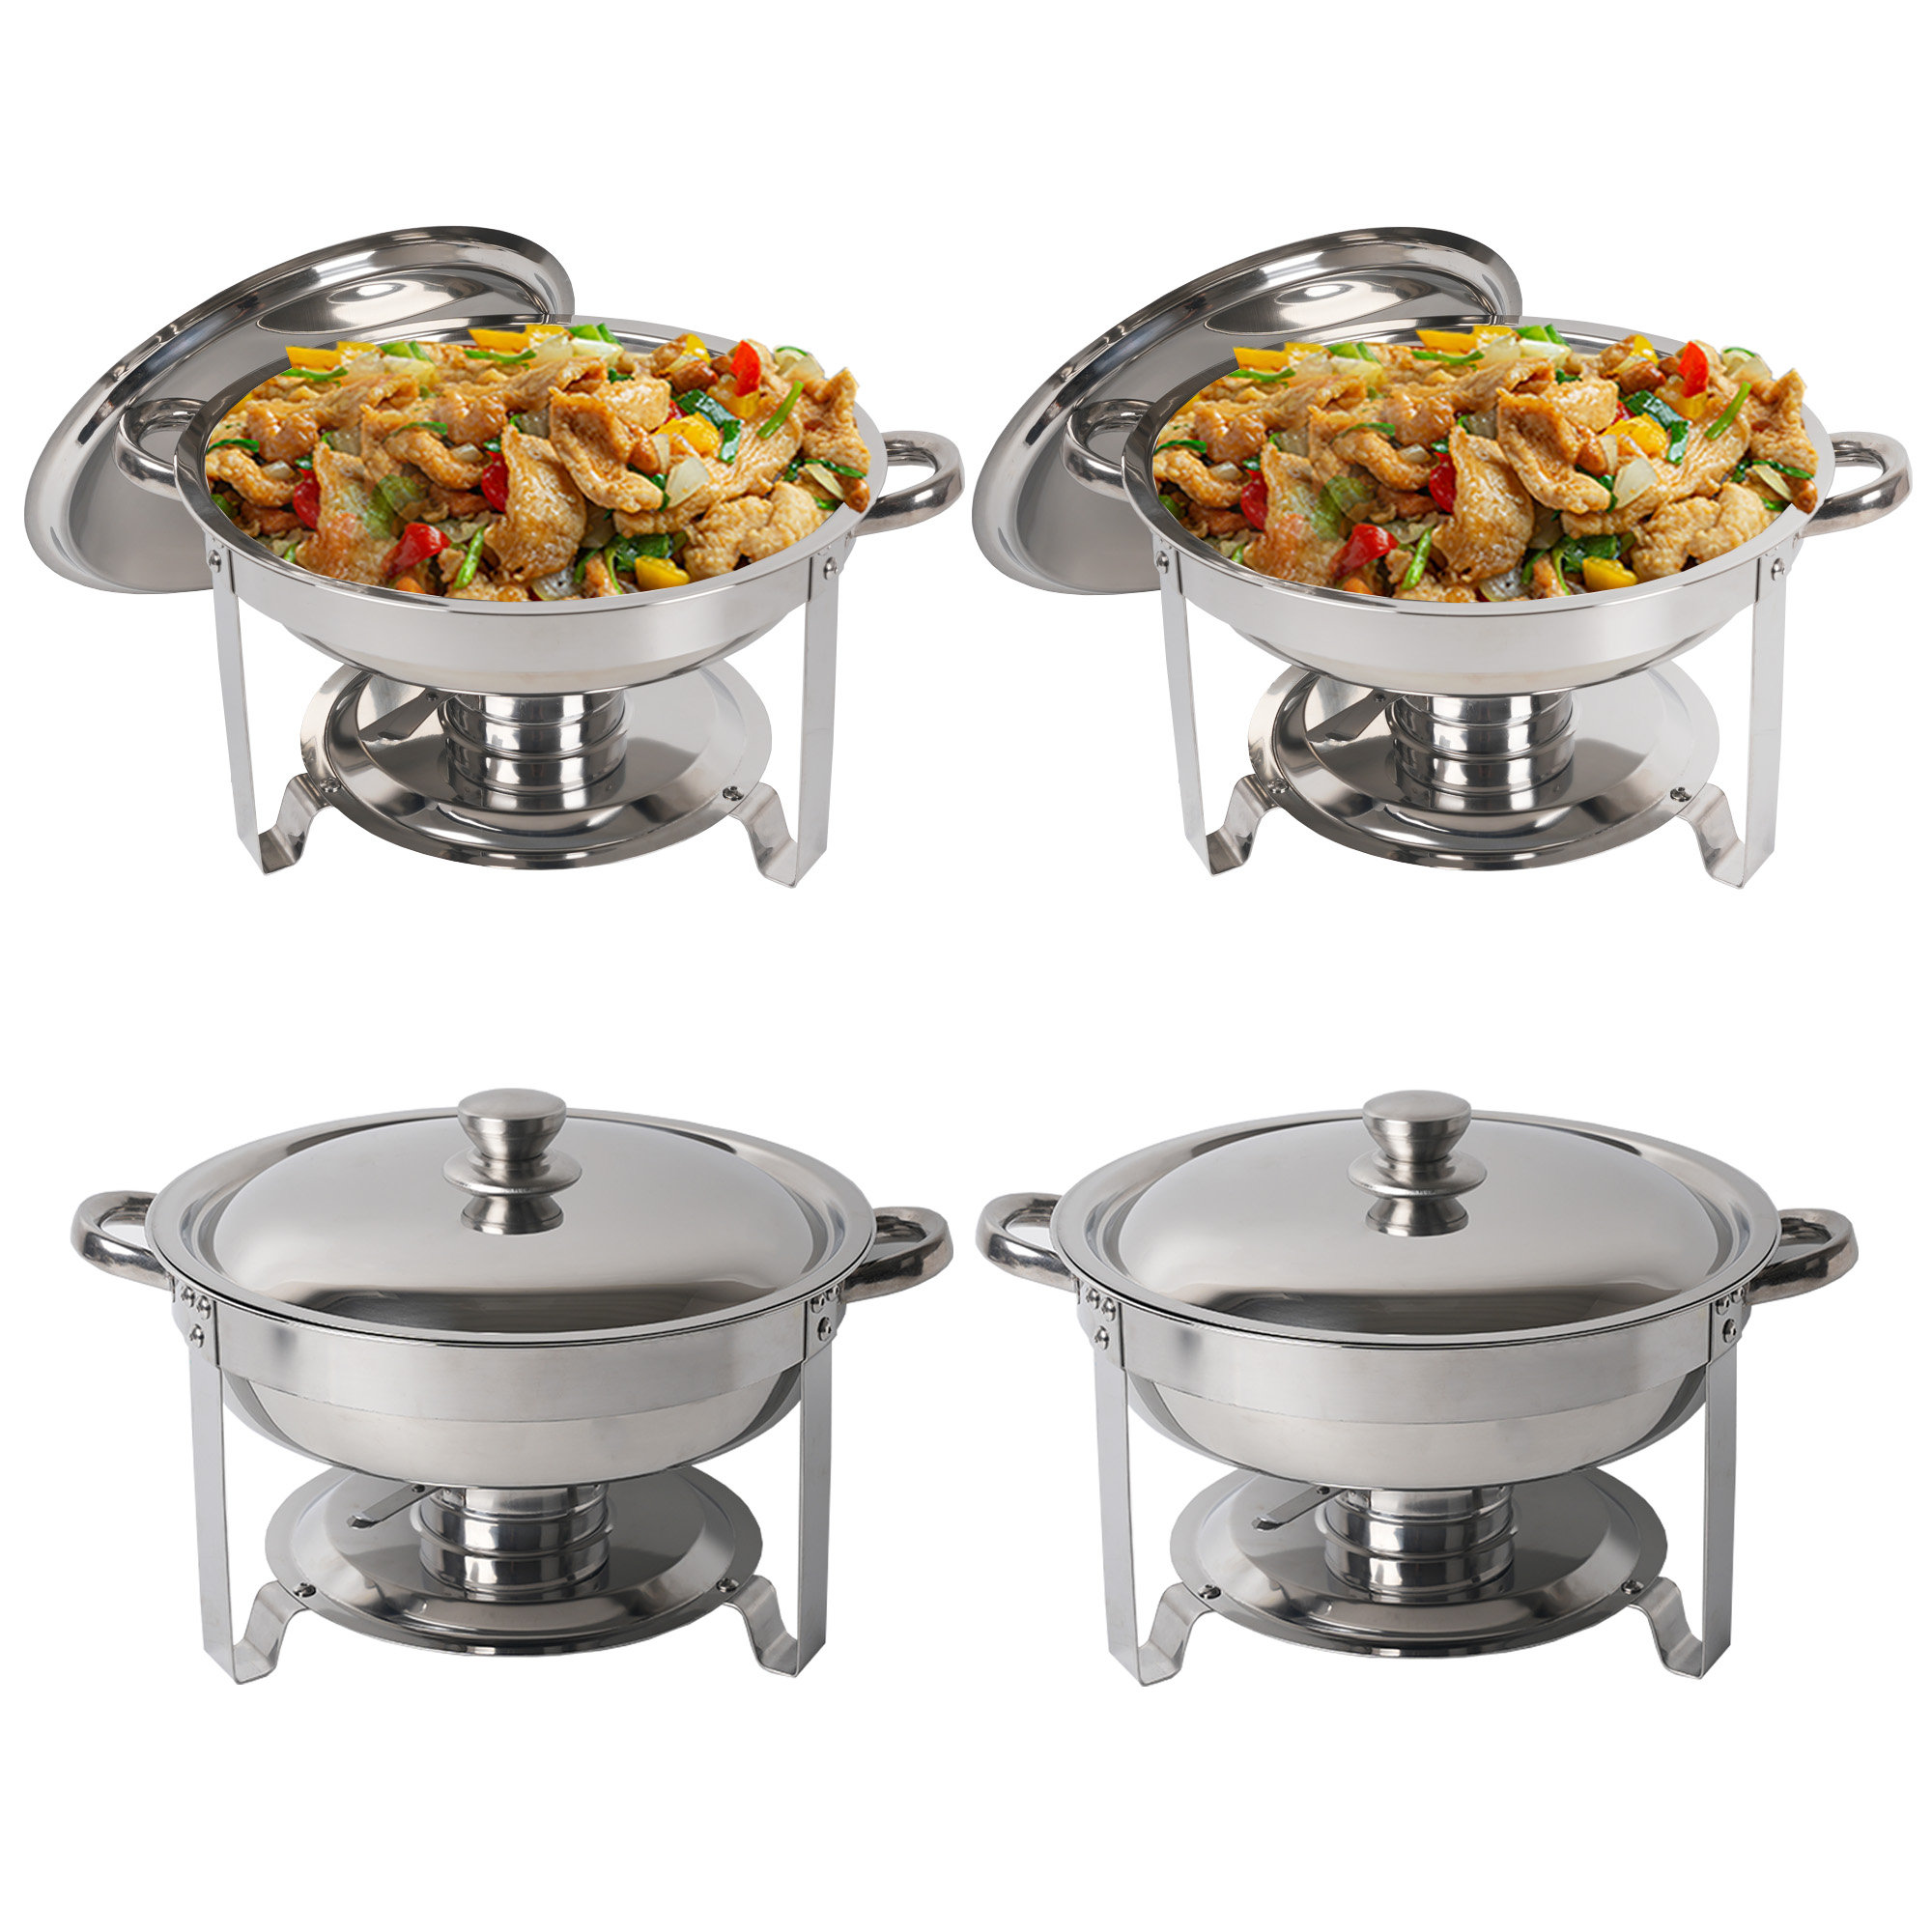 Stainless Steel Chafing Dish Set With Electric Or Fuel Heater Chafing Dishes  Food Warmer Buffet Stoves with glass lid